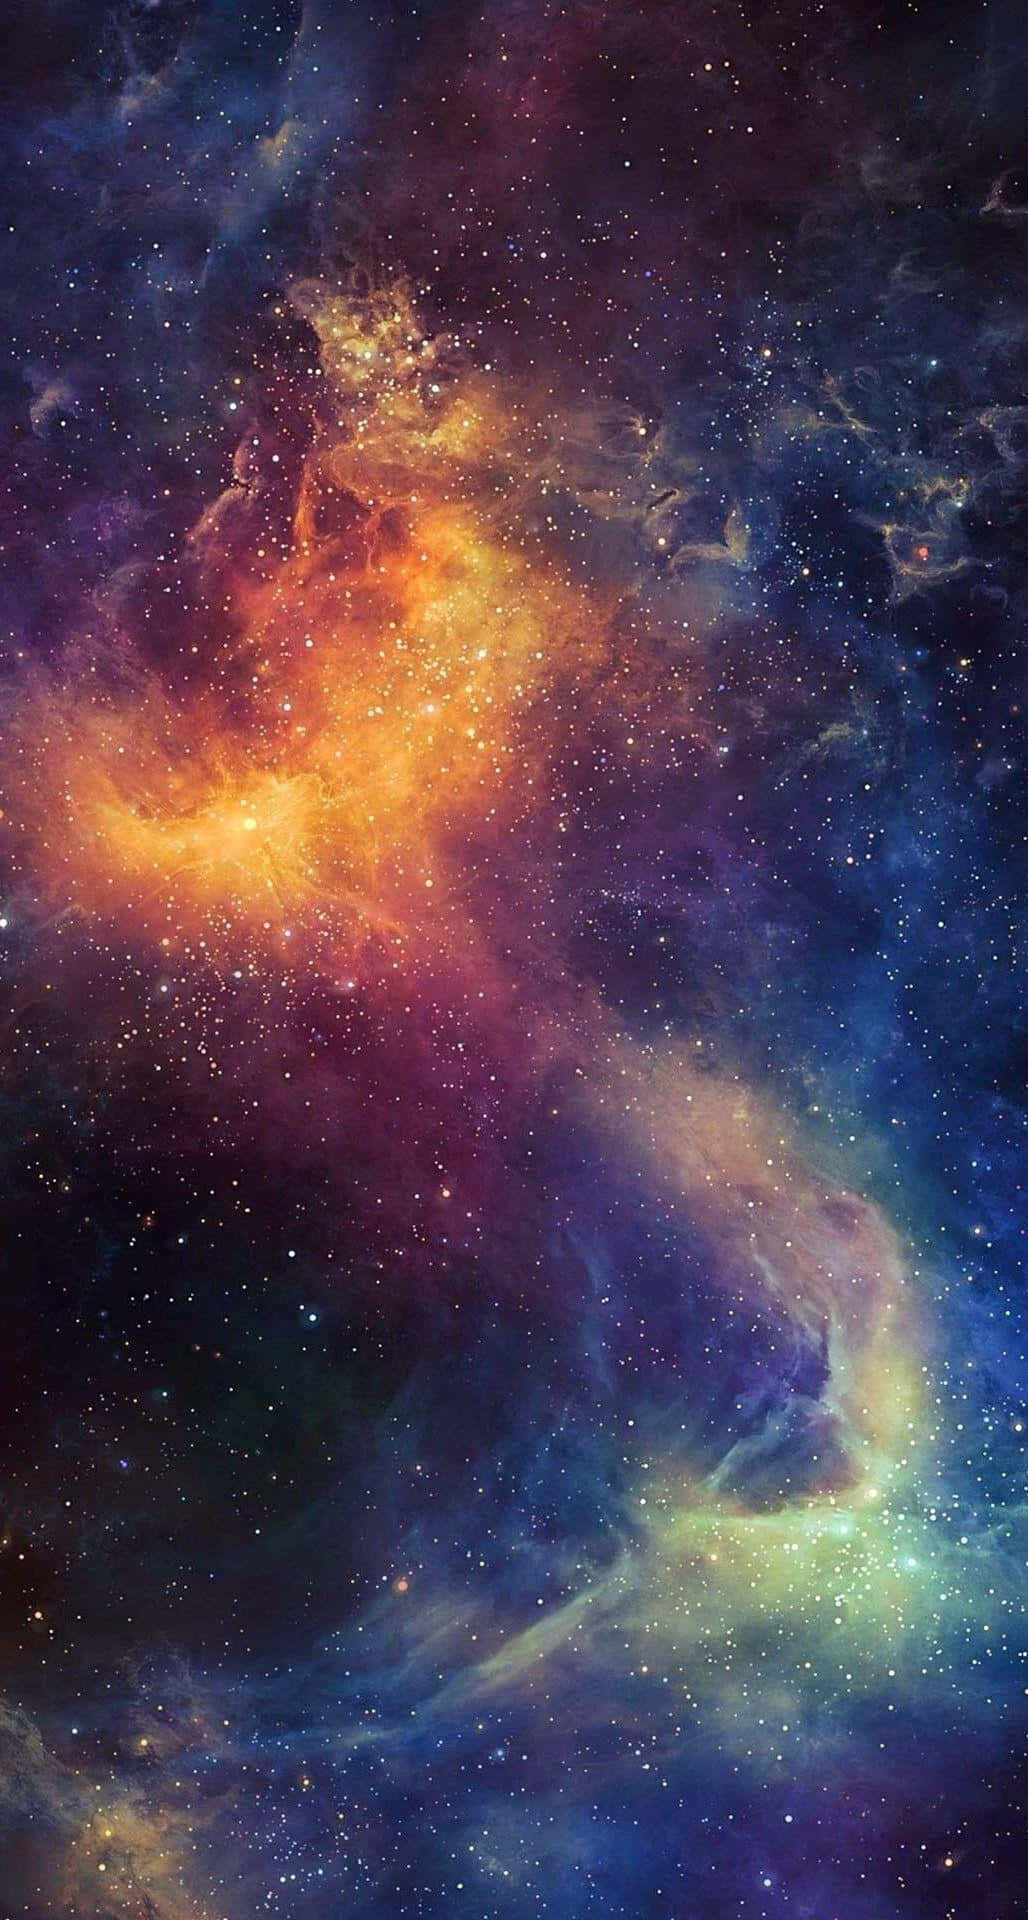 A Colorful Space With Stars And Nebulas